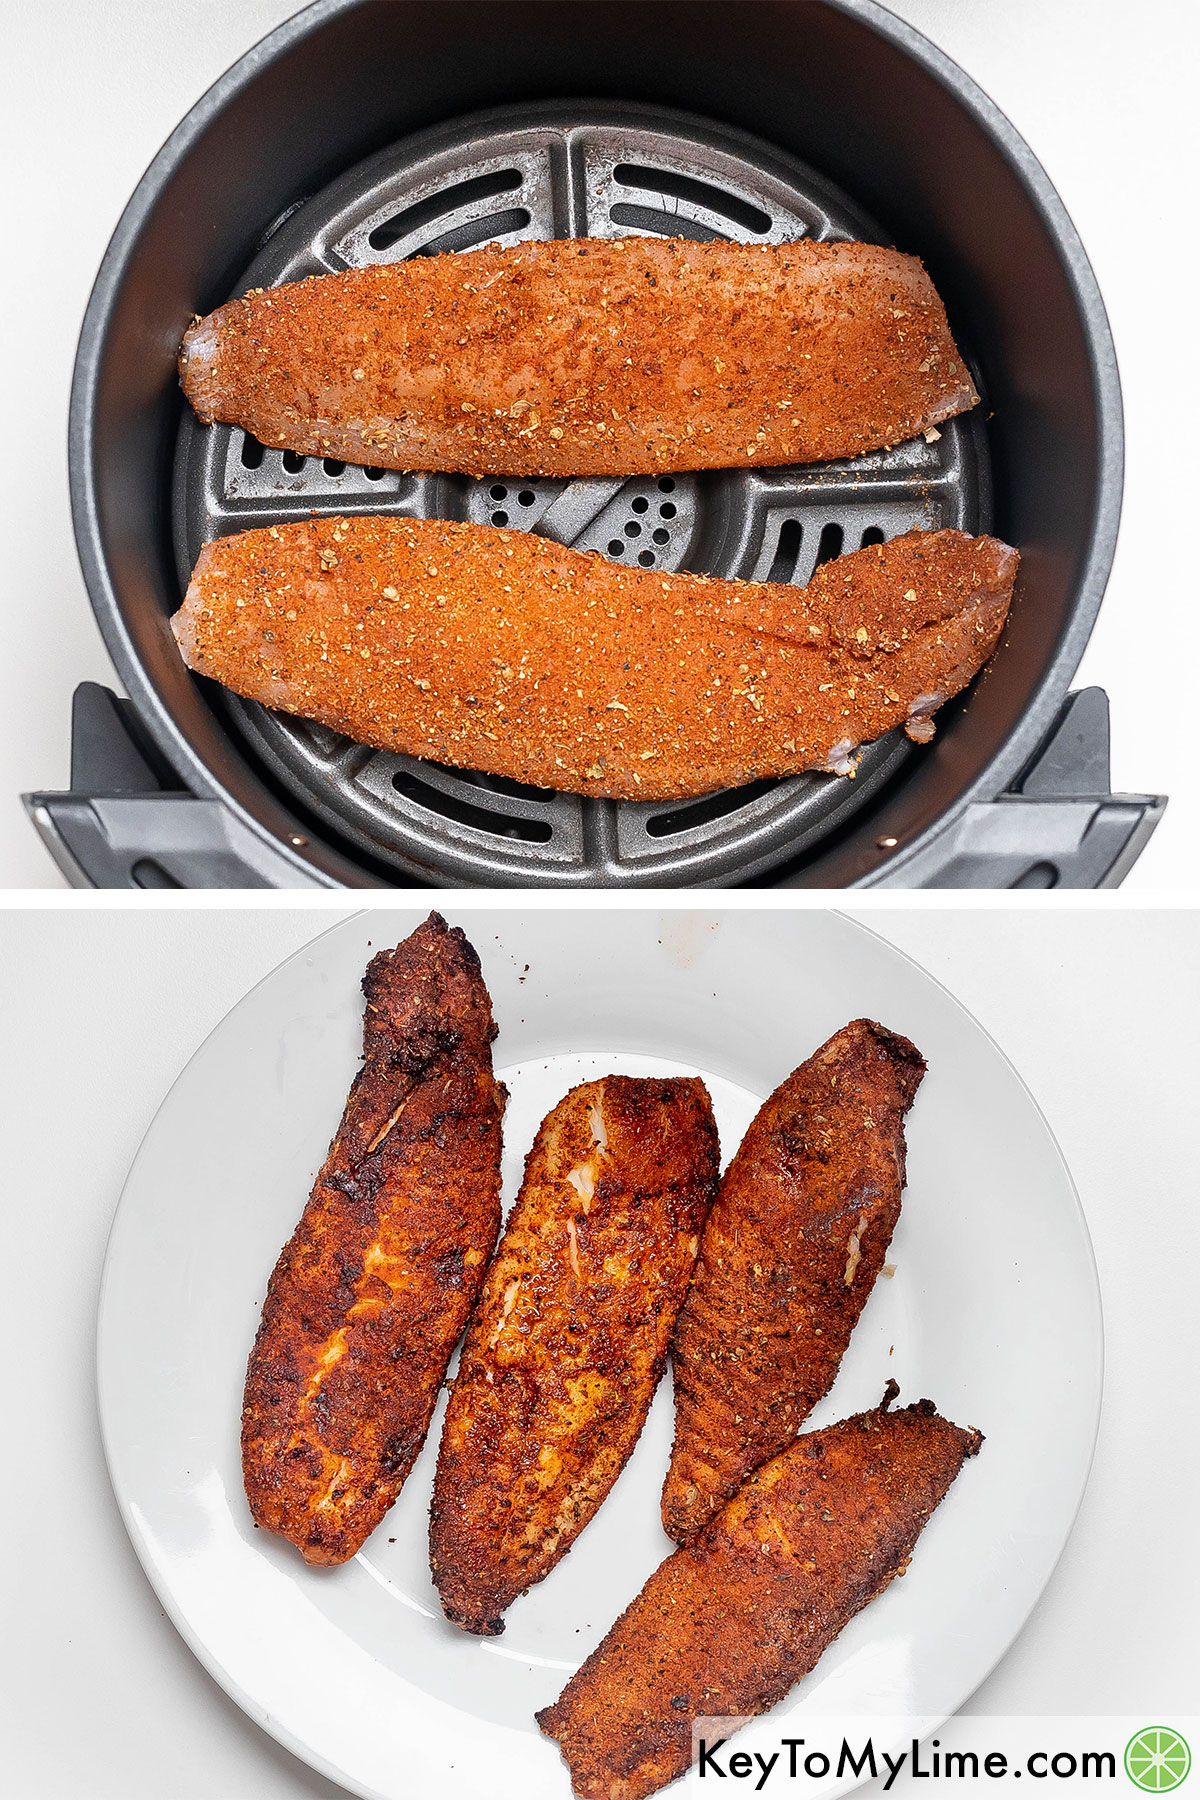 Placing the coated filets into an air fryer basket to cook and then placing on a plate once cooked.